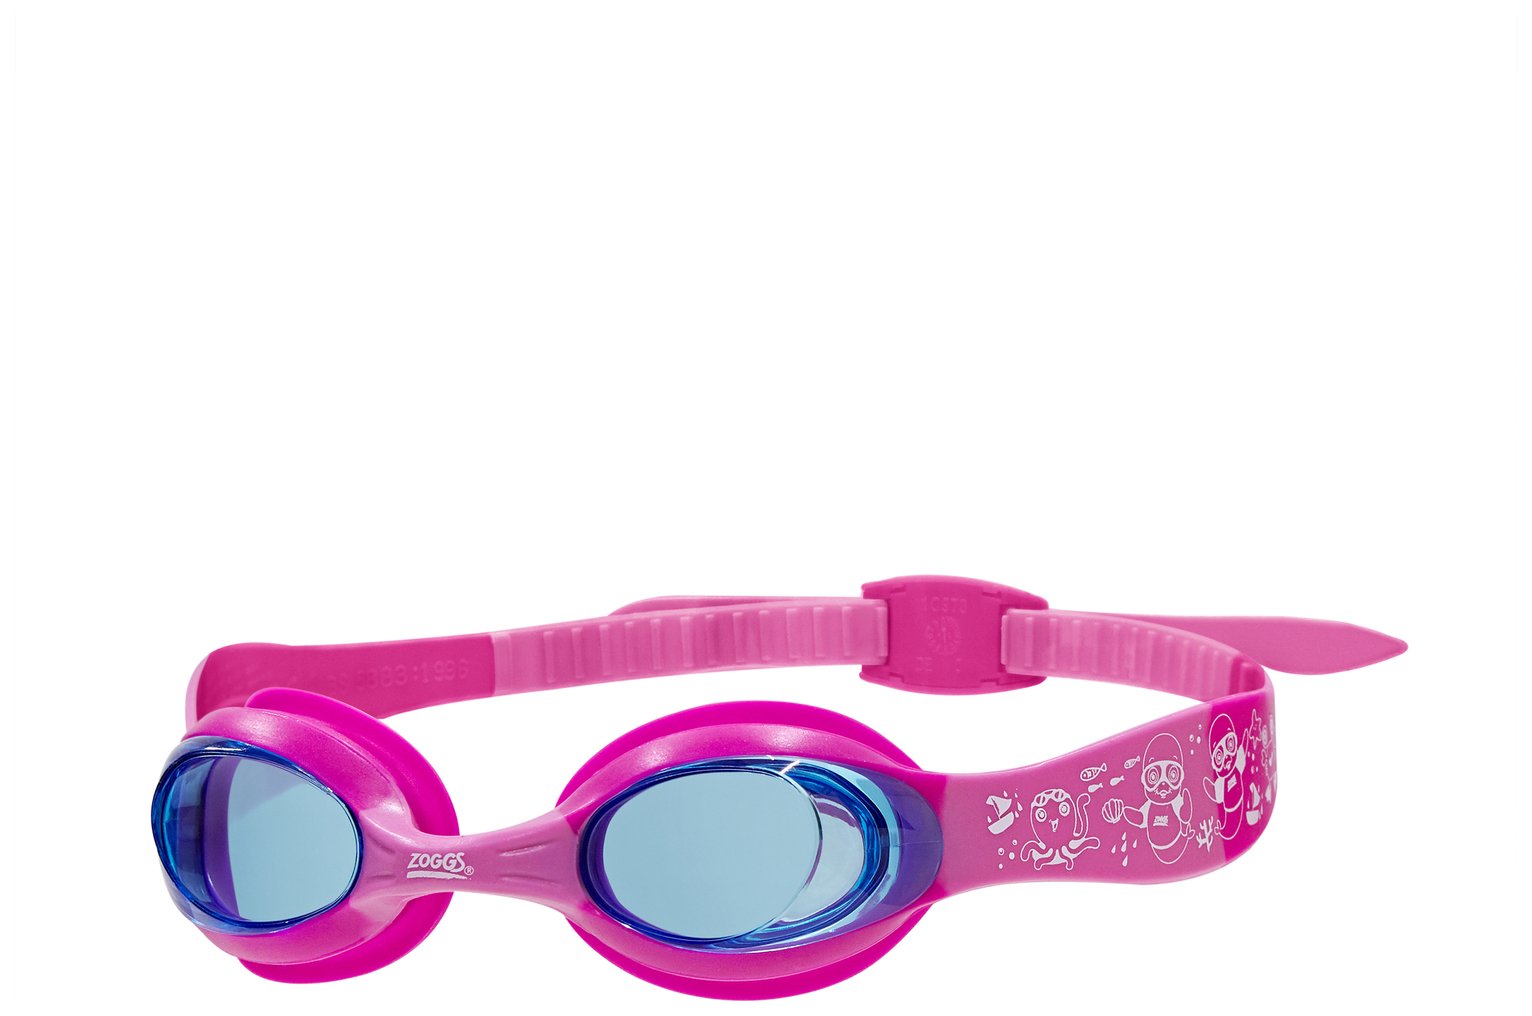 Zoggs Little Twist Pink Goggles review